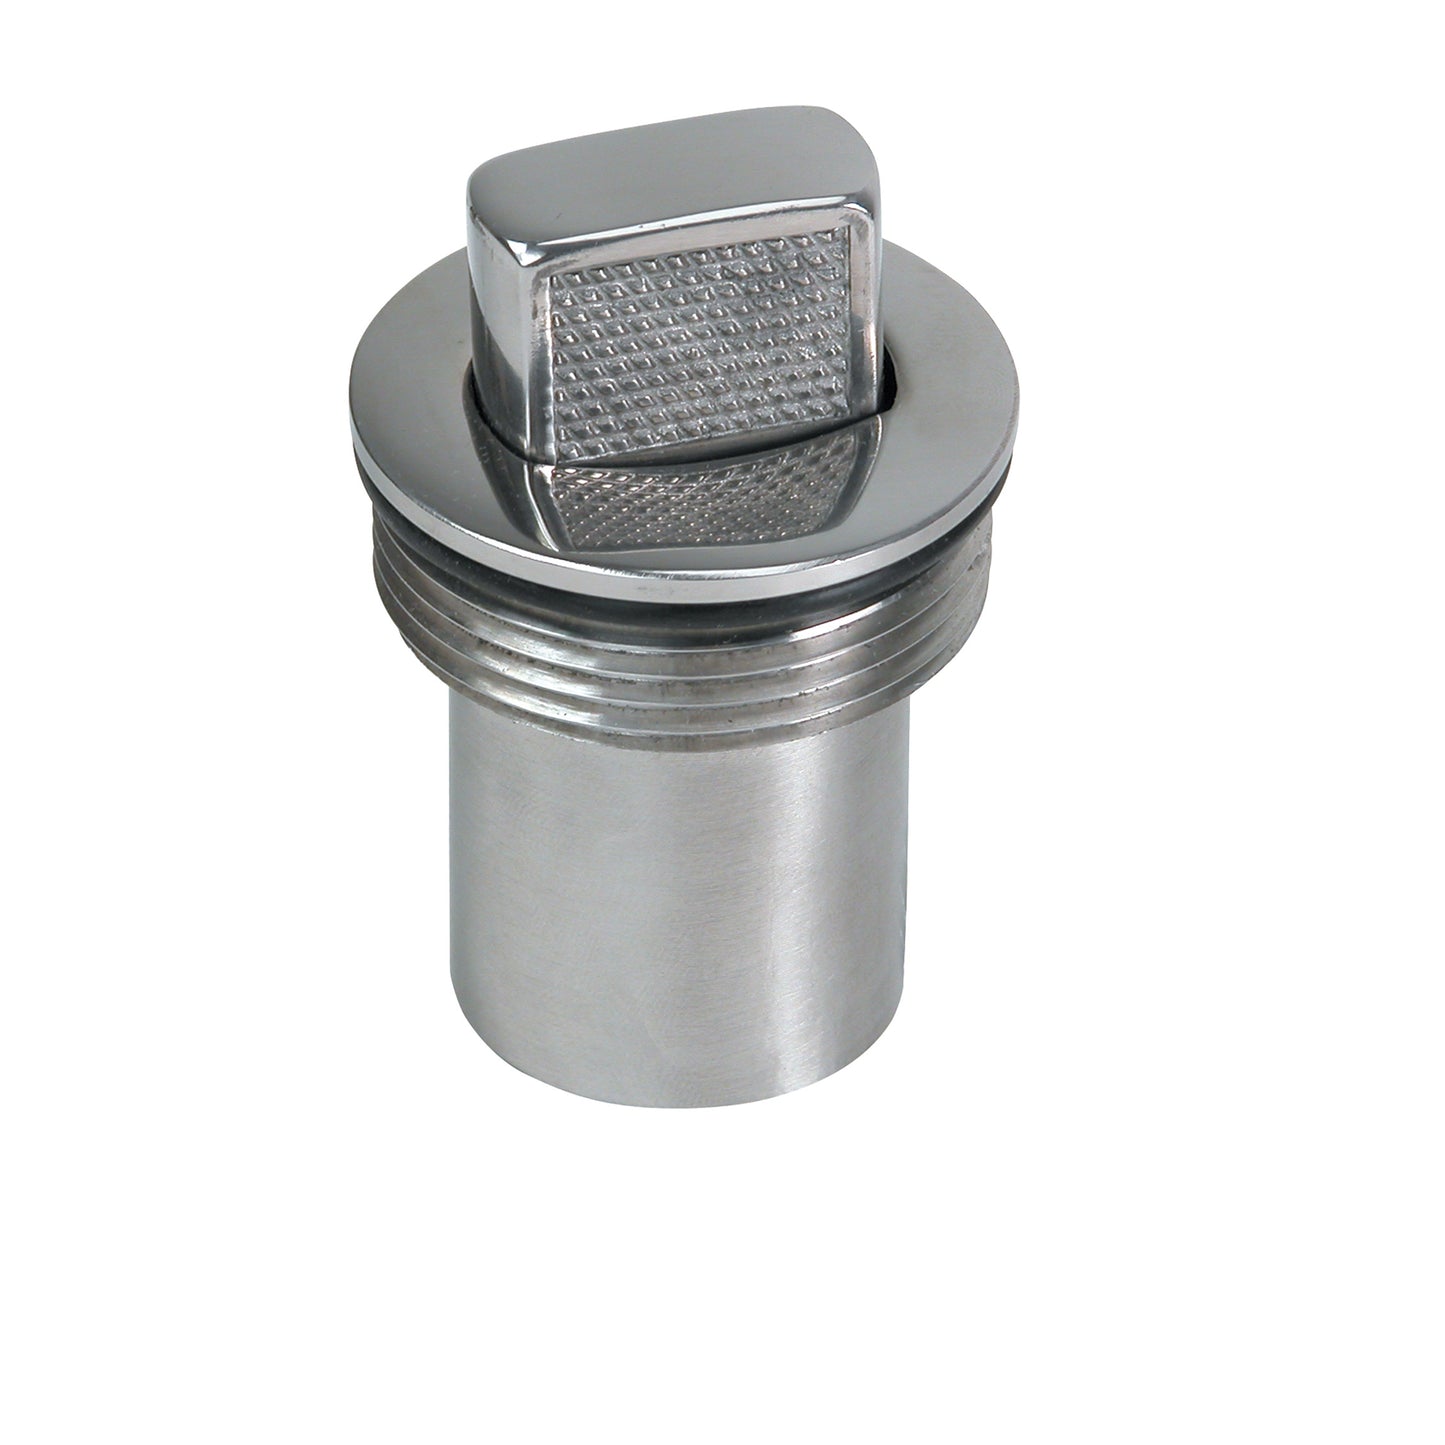 1-1/2" Universal Push Up Deck Fill Replacement Cap